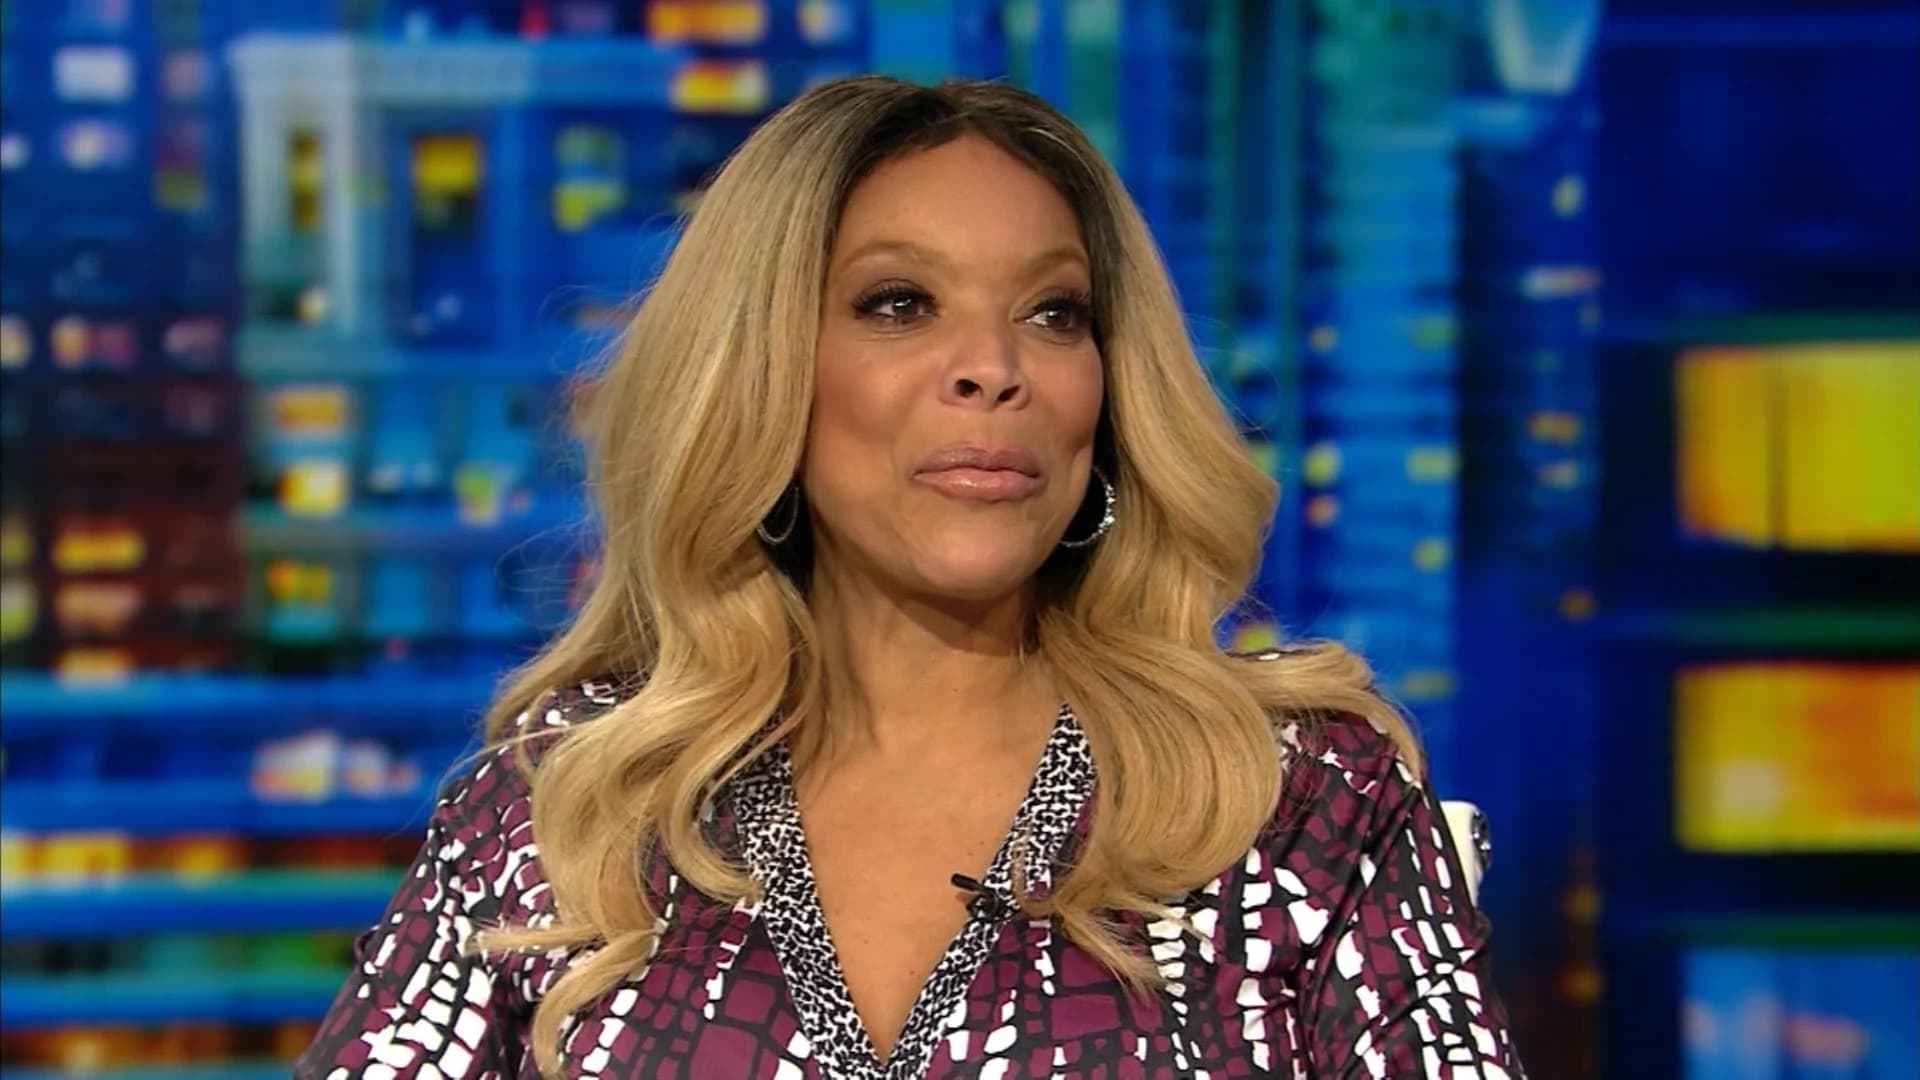 Reports: Wendy Williams found drunk after husband's alleged mistress gives birth